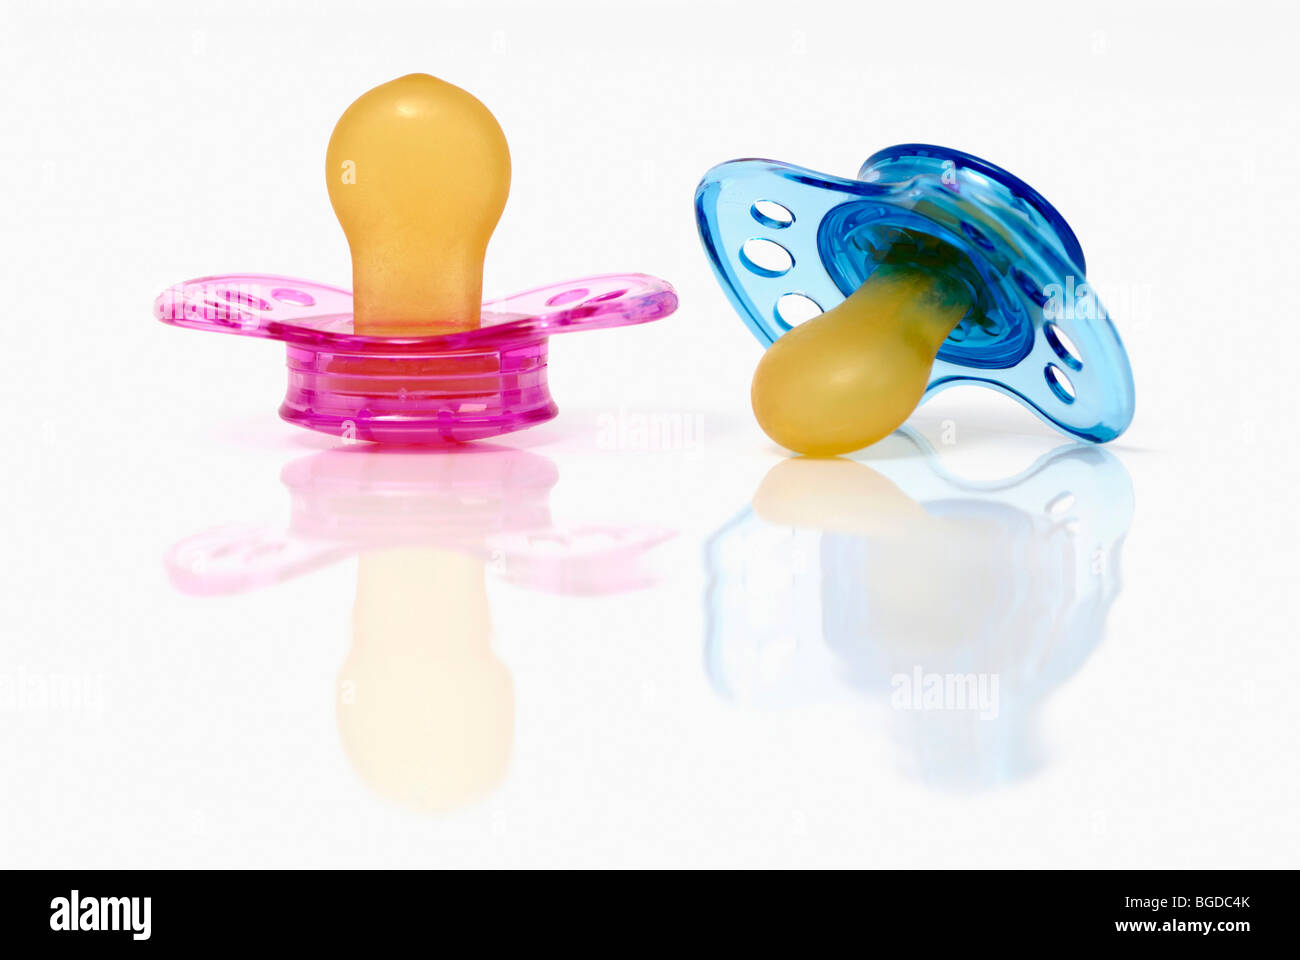 Two pacifiers Stock Photo